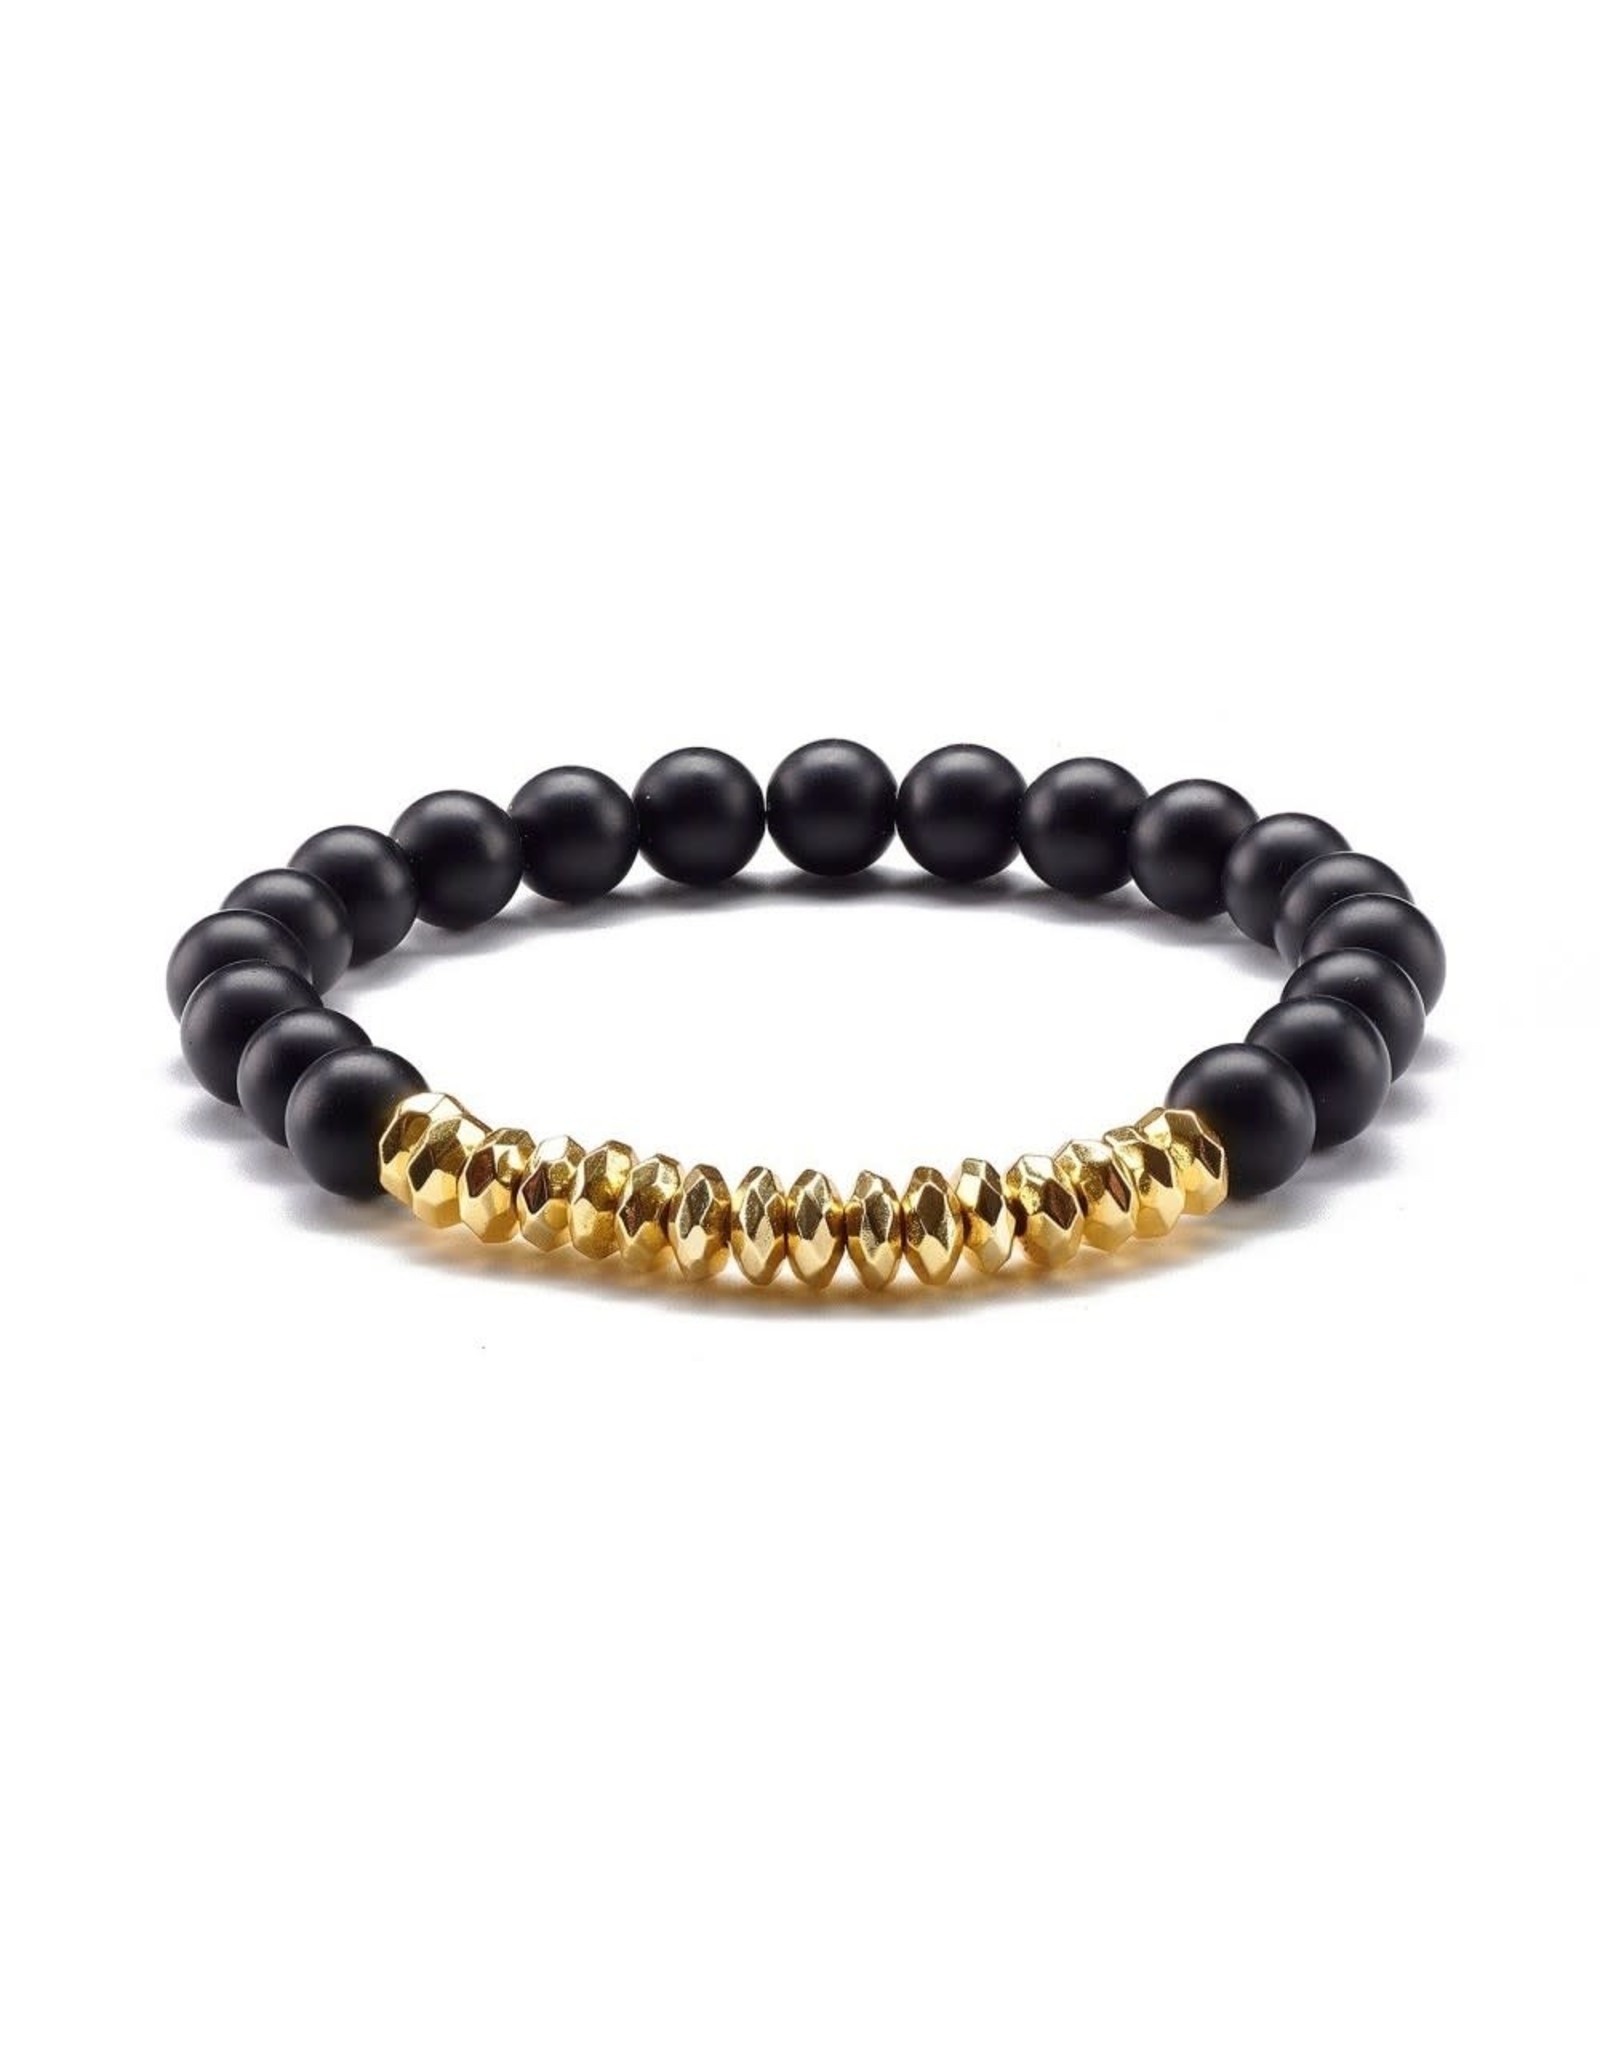 Bracelet with 8mm Black Stone and Gold Spacers